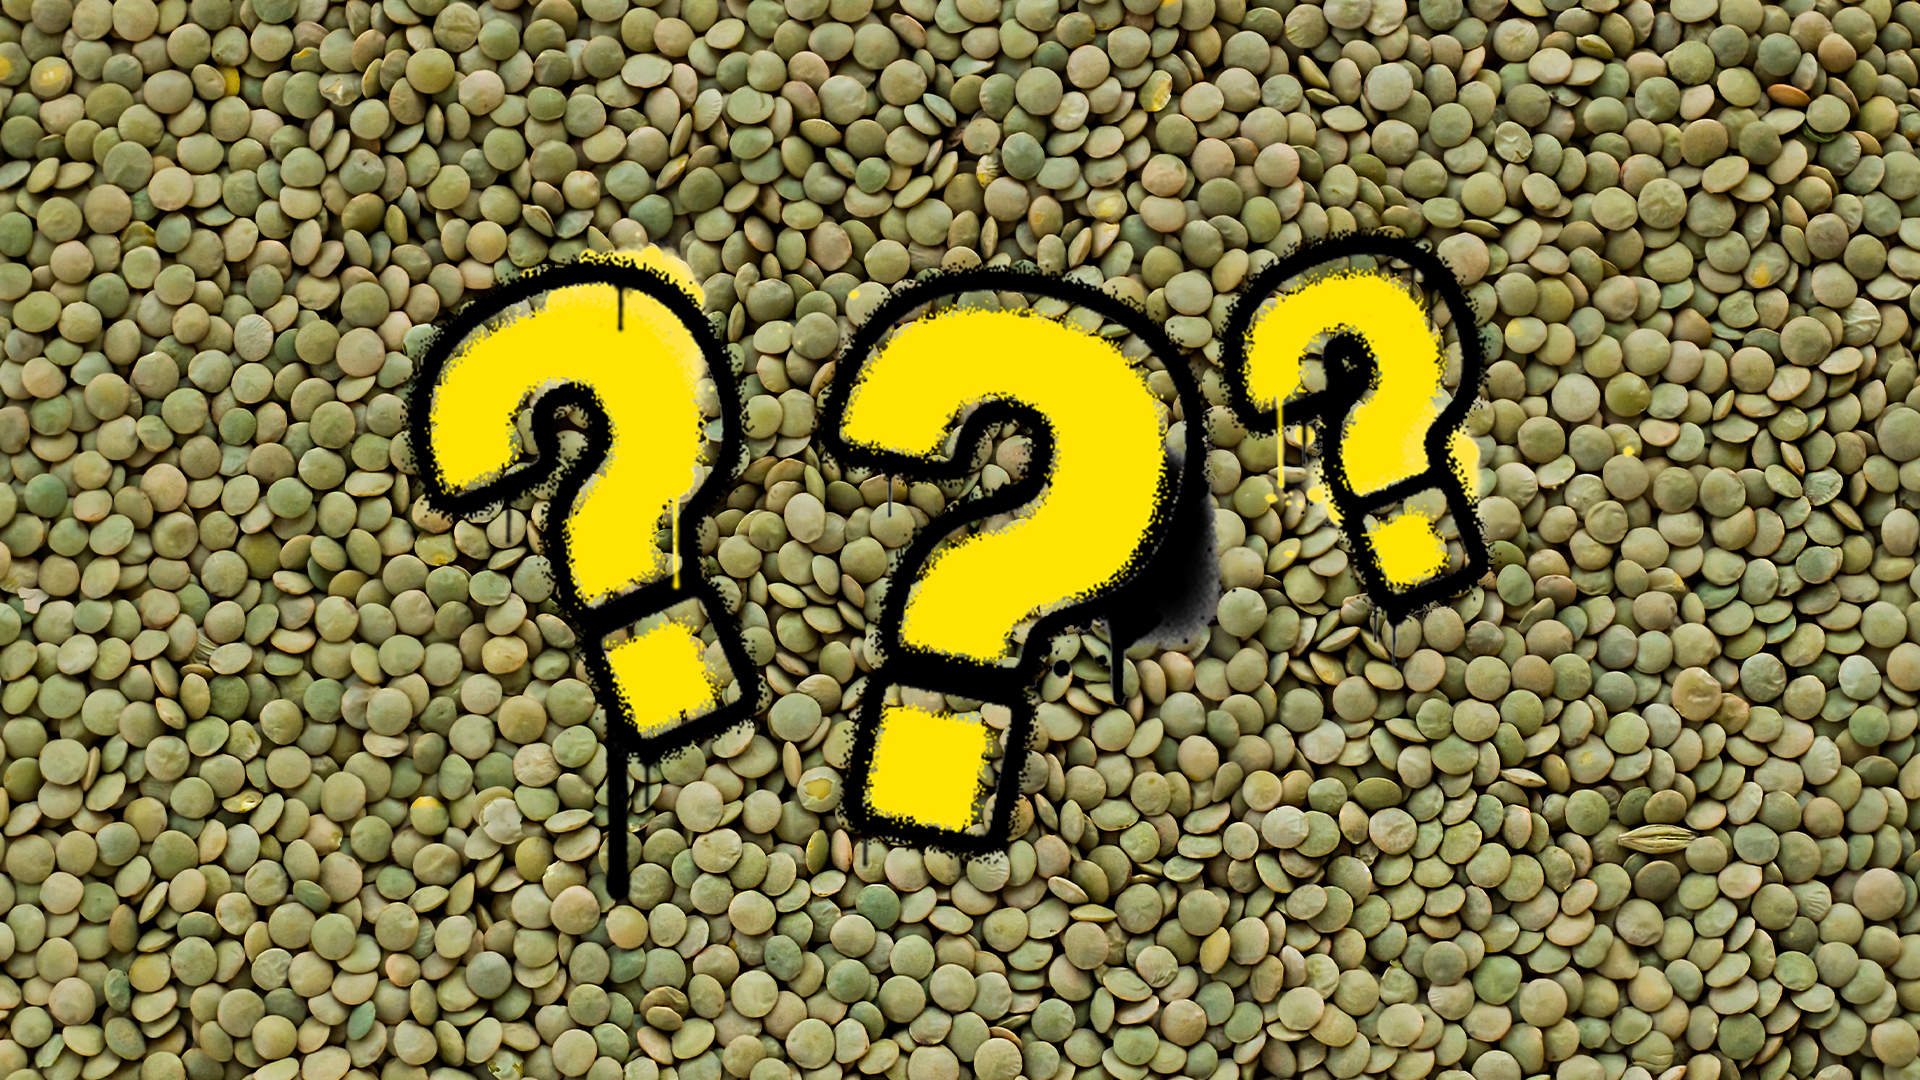 Lentils and question marks